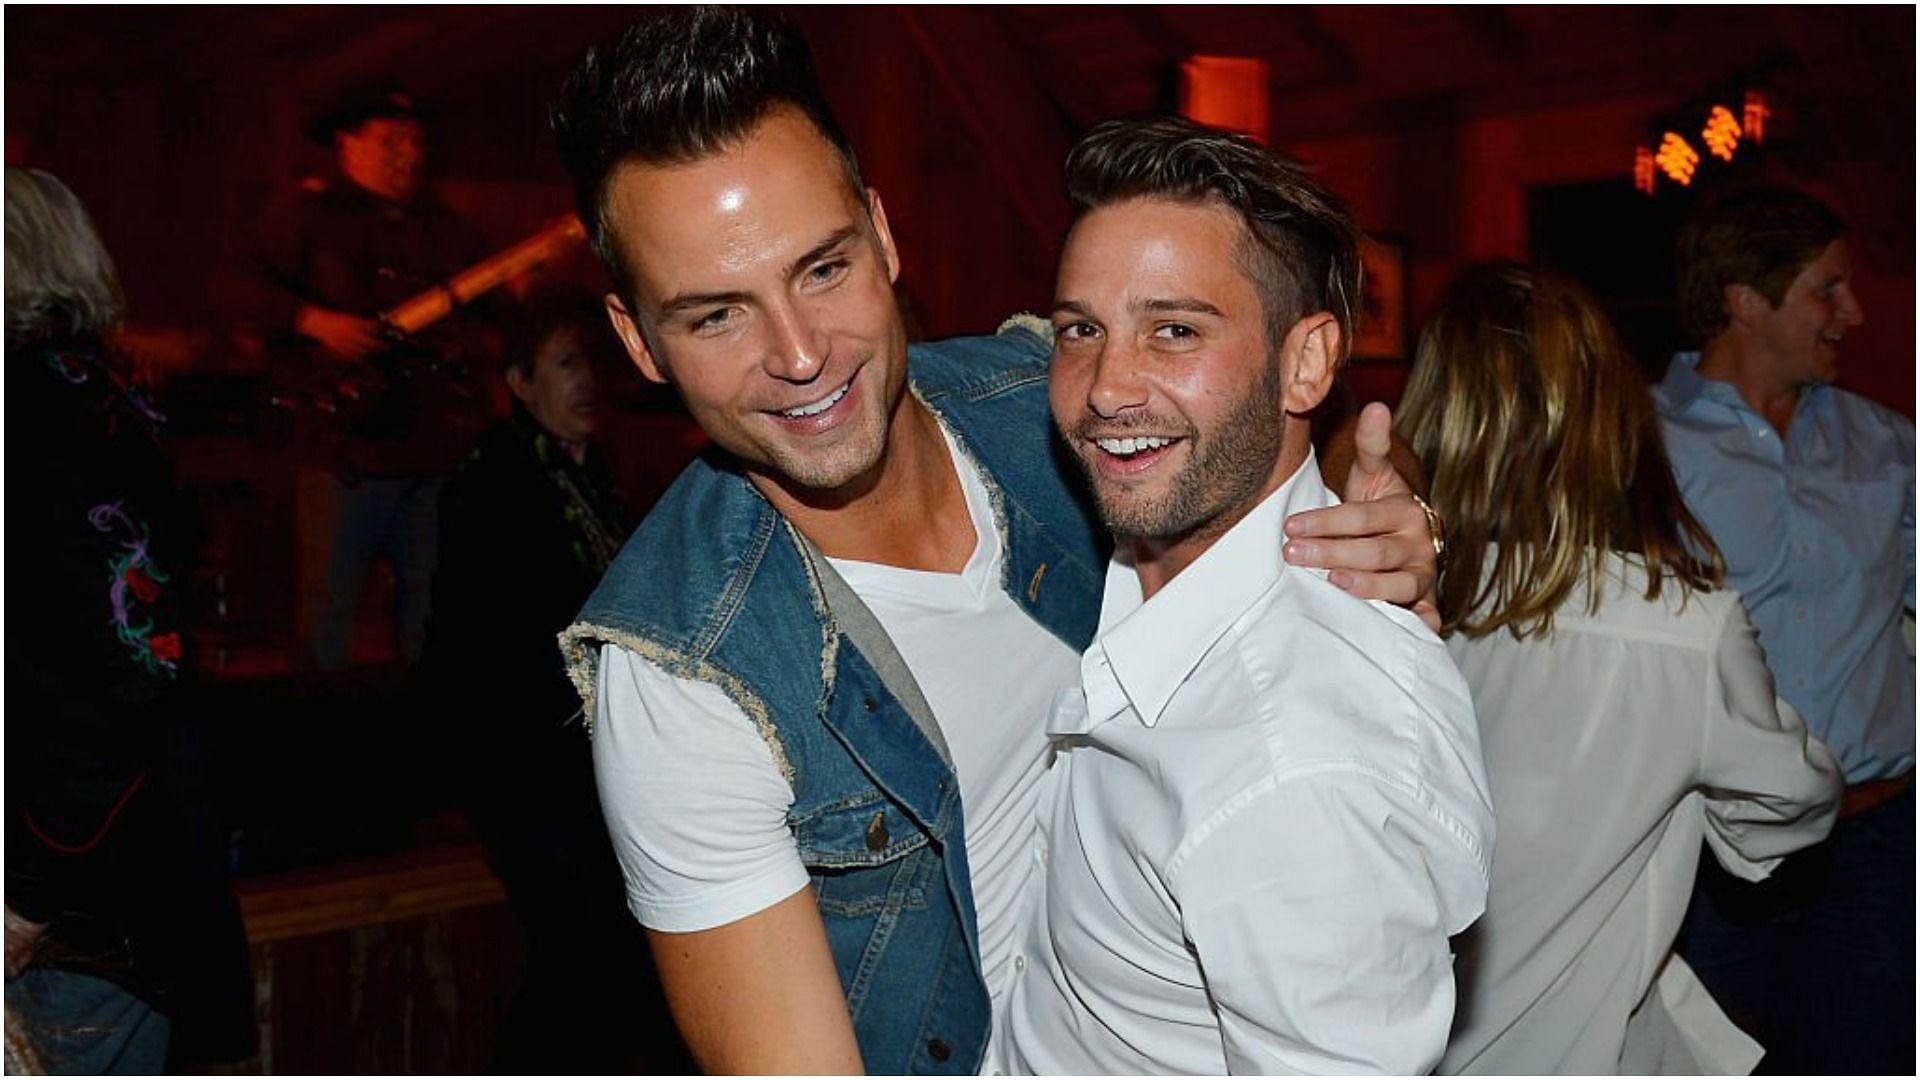 Josh Flagg and Bobby Boyd&#039;s cause of divorce has not been revealed yet (Image via Patrick McMullan/Getty Images)